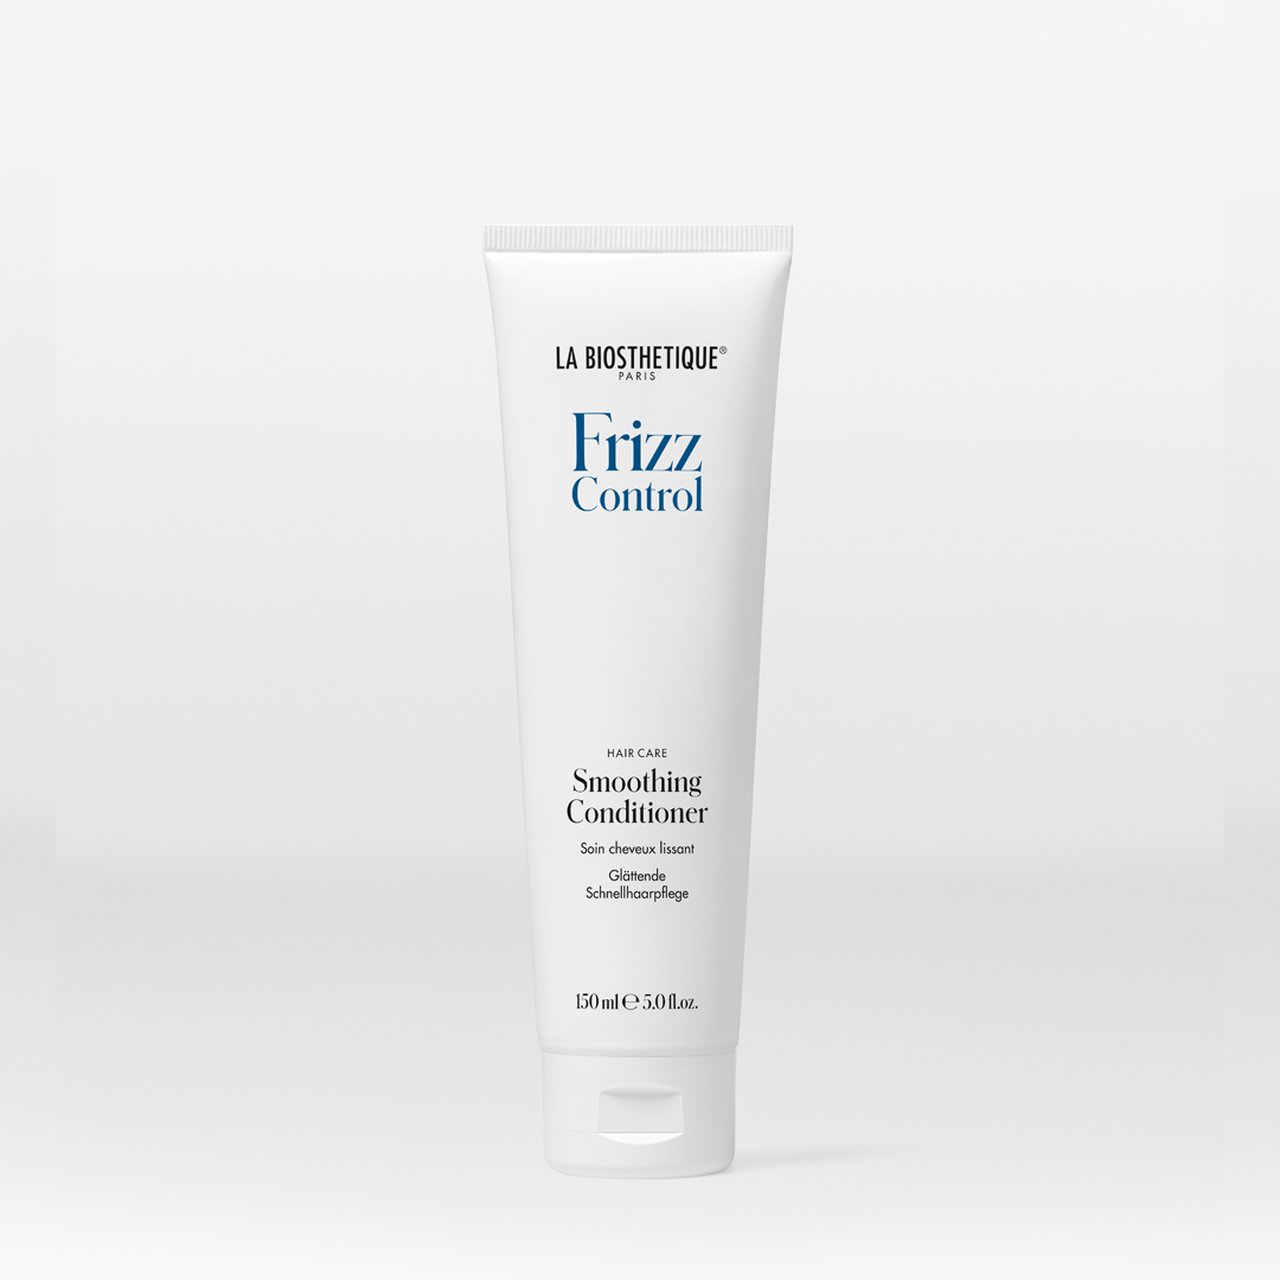 La Biosthetique Frizz Control Smoothing Conditioner 150ml - shelley and co